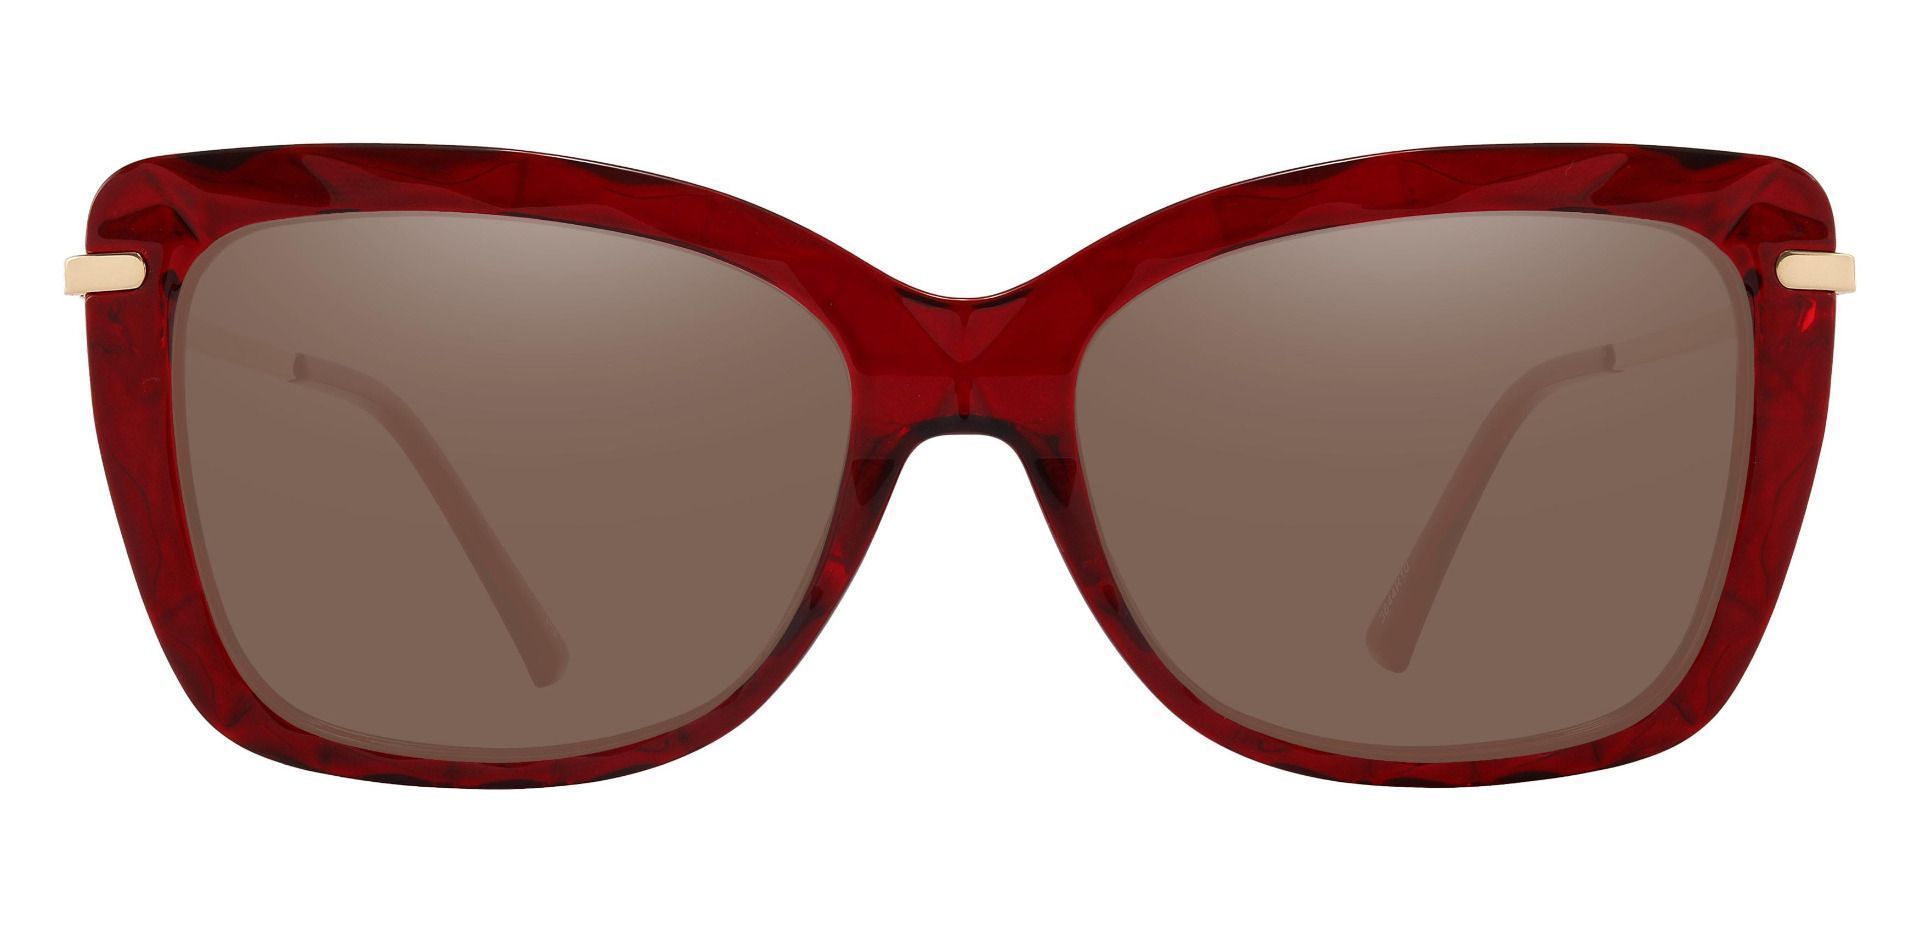 Shoshanna Rectangle Non-Rx Sunglasses - Red Frame With Brown Lenses